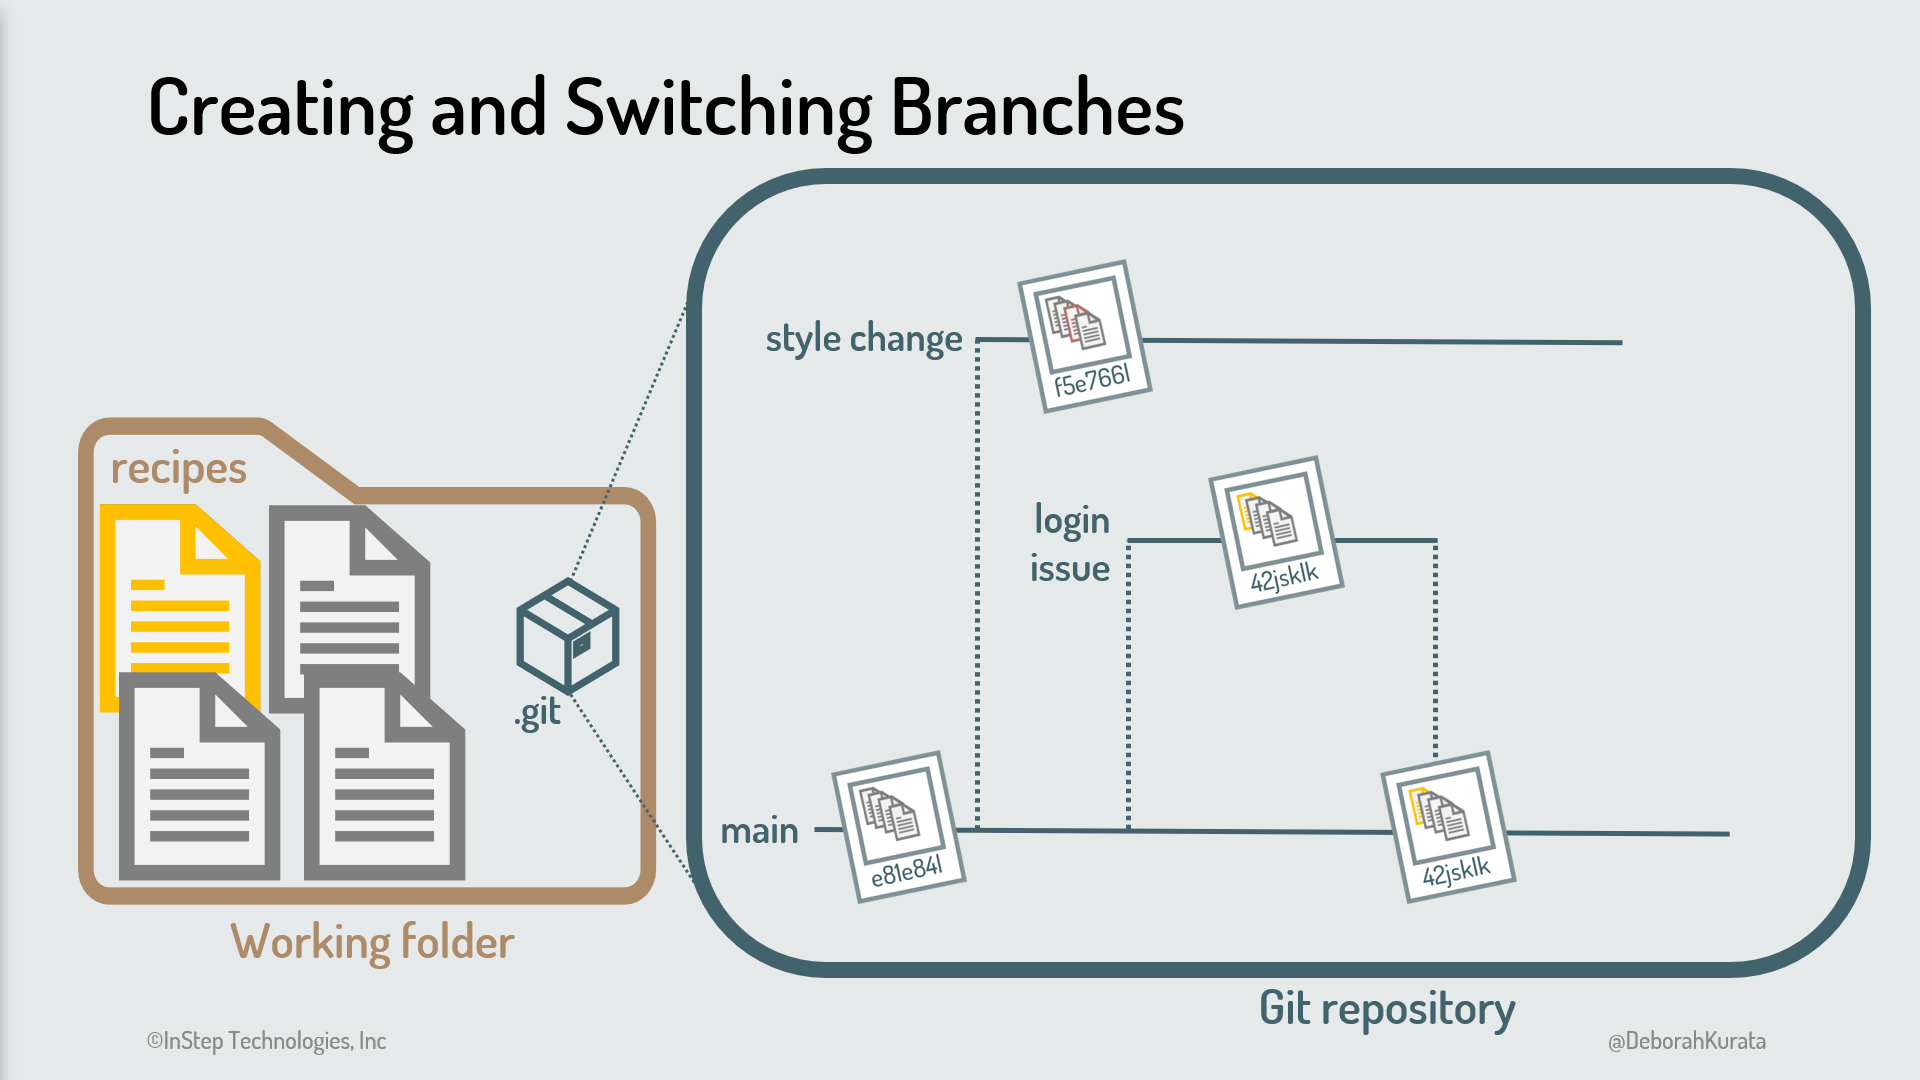 Working folder on the left. Git repository showing the merge of "login issue" branch into main